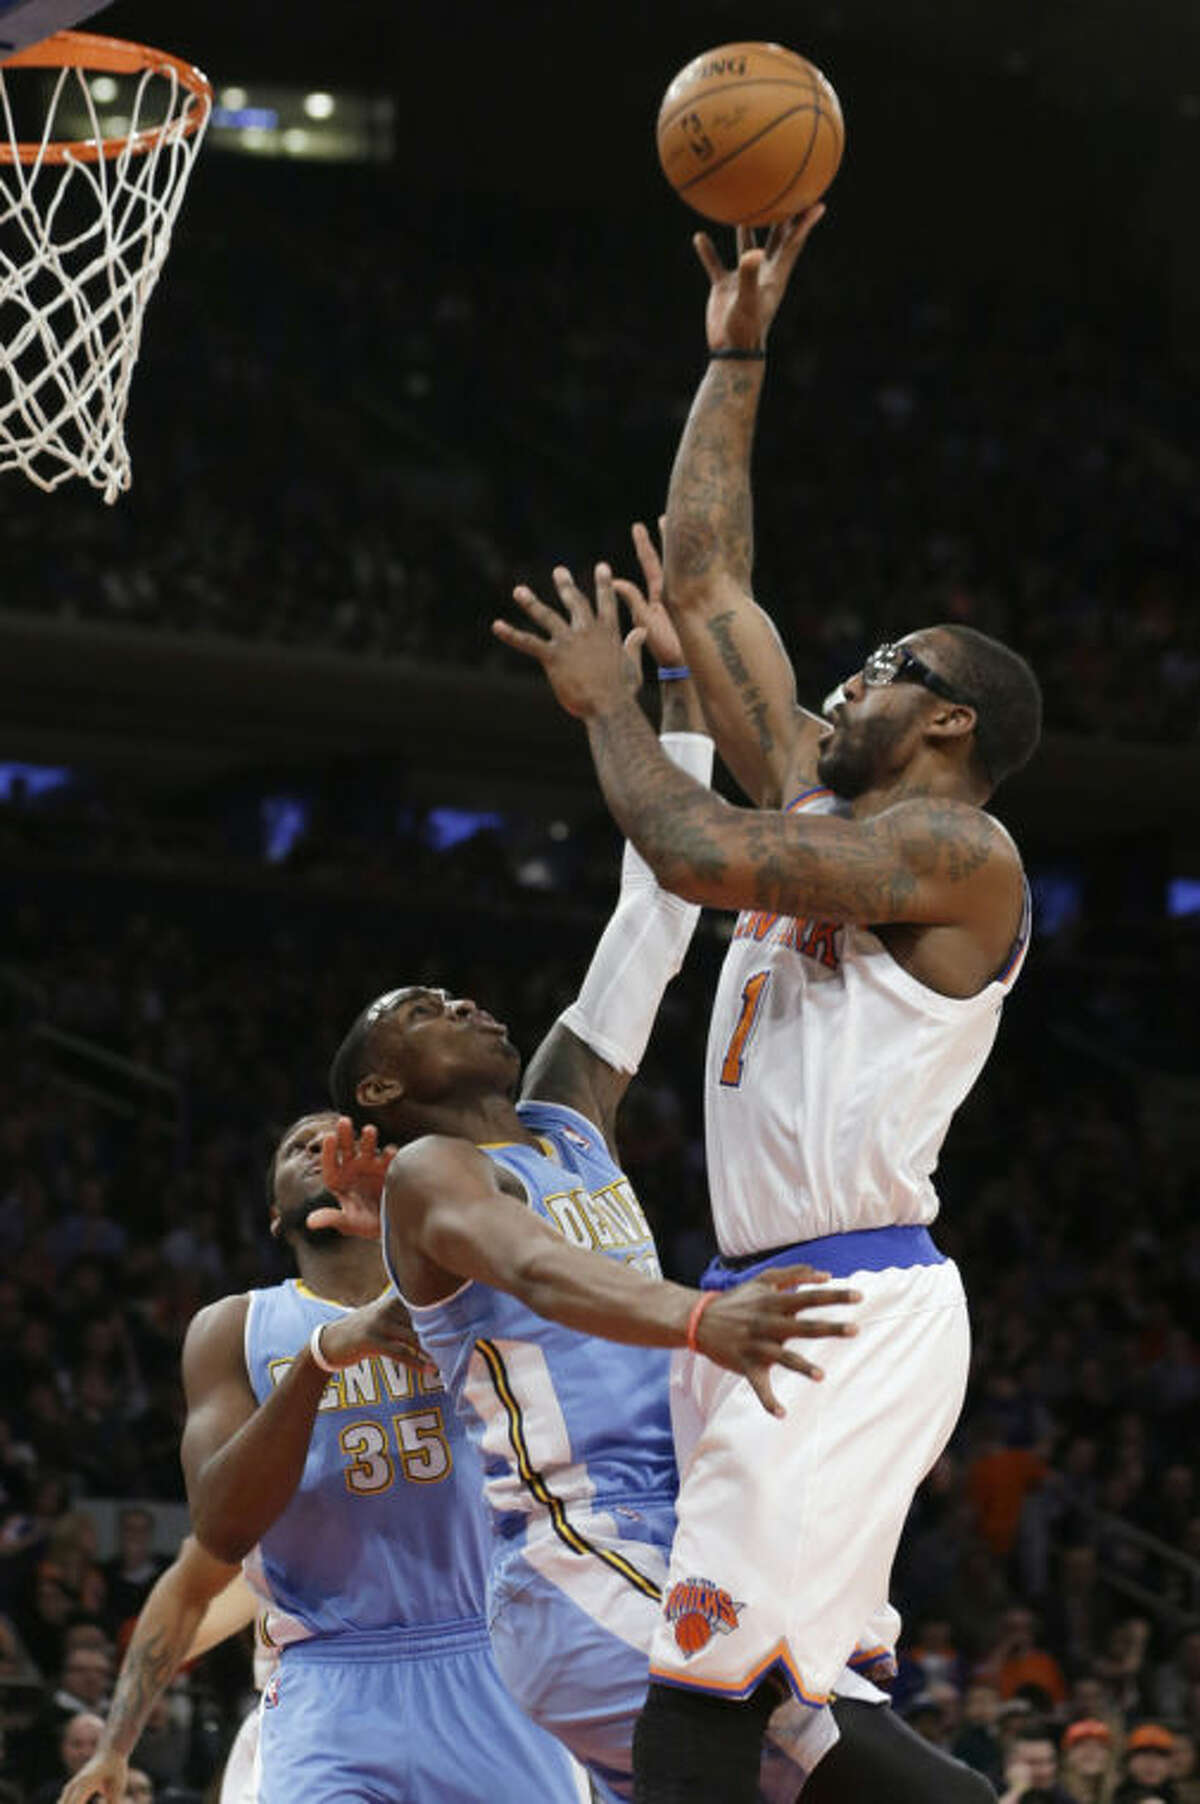 New York Knicks' Amare Stoudemire (1) shoots over Denver Nuggets' Quincy Miller (30) during the first half of an NBA basketball game Friday, Feb. 7, 2014, in New York. (AP Photo/Frank Franklin II)